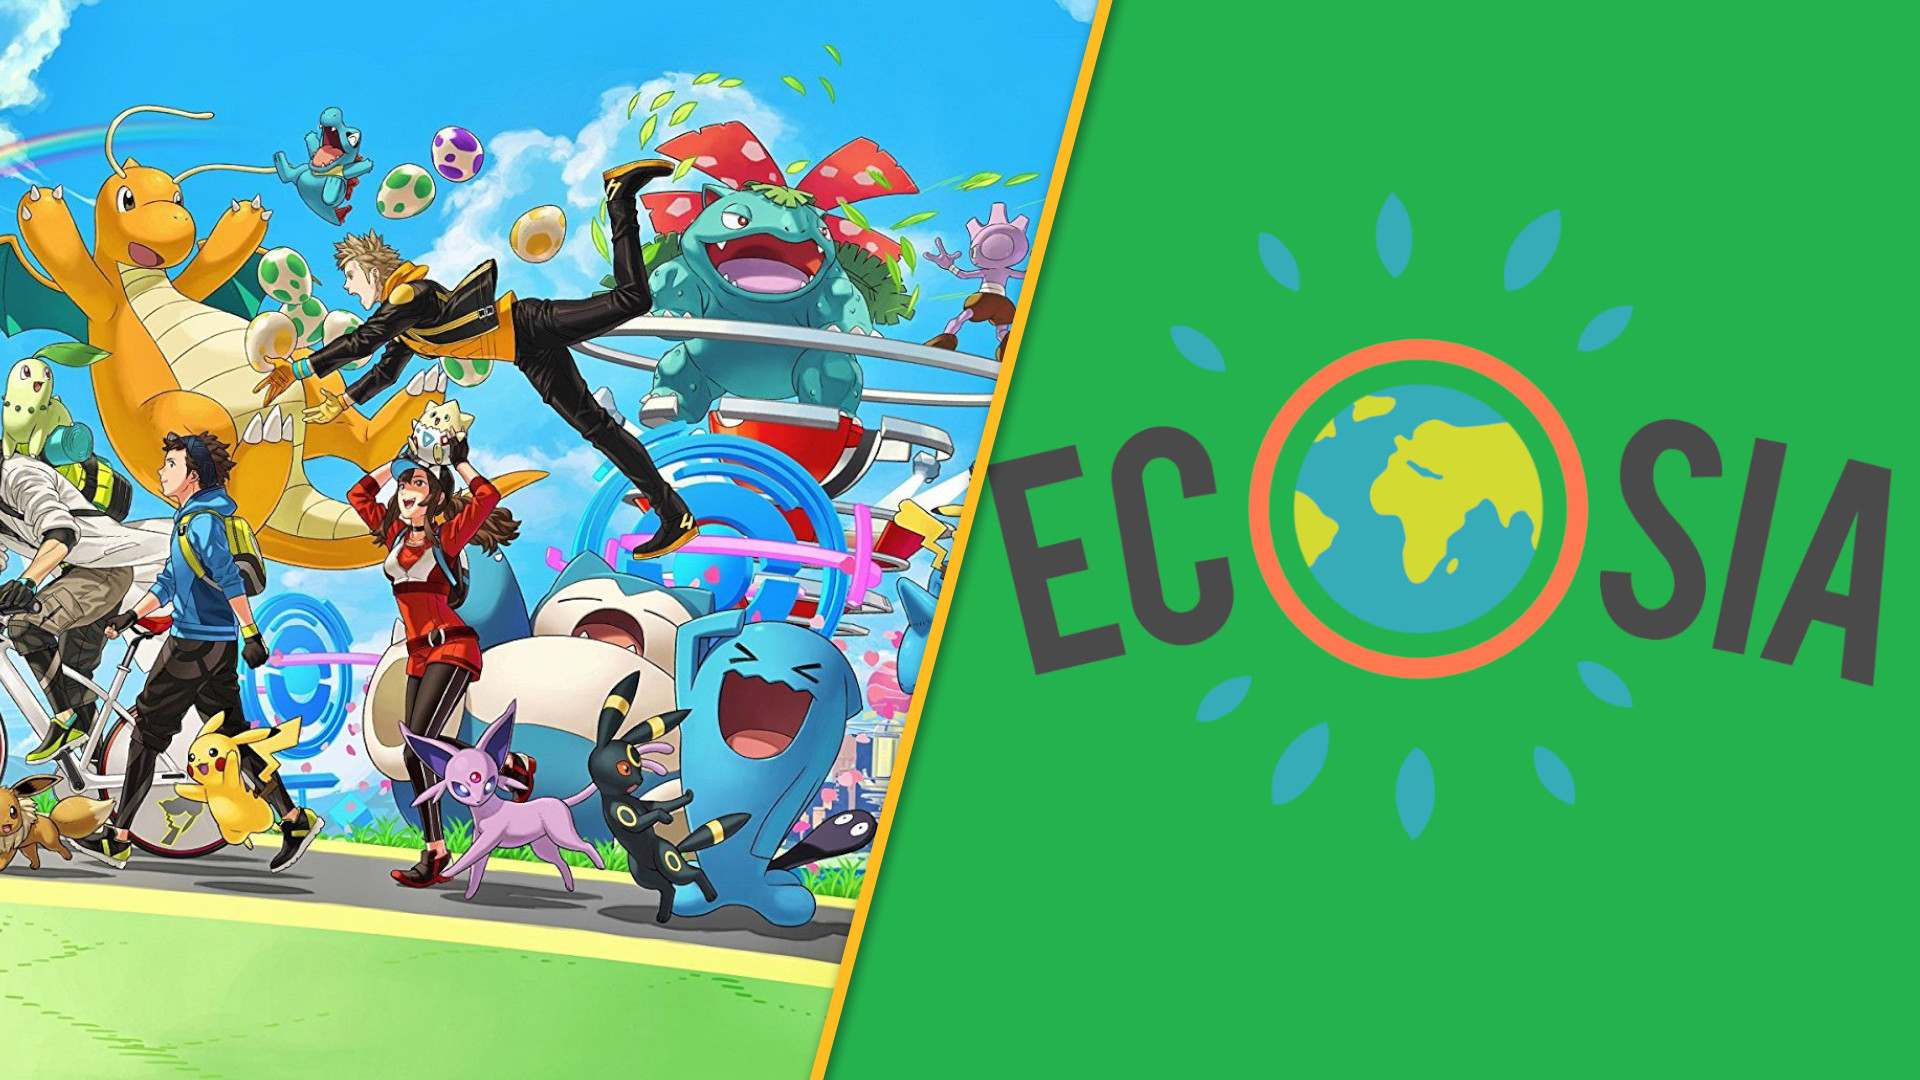 Pokémon Go gets greenfingered for sustainability week